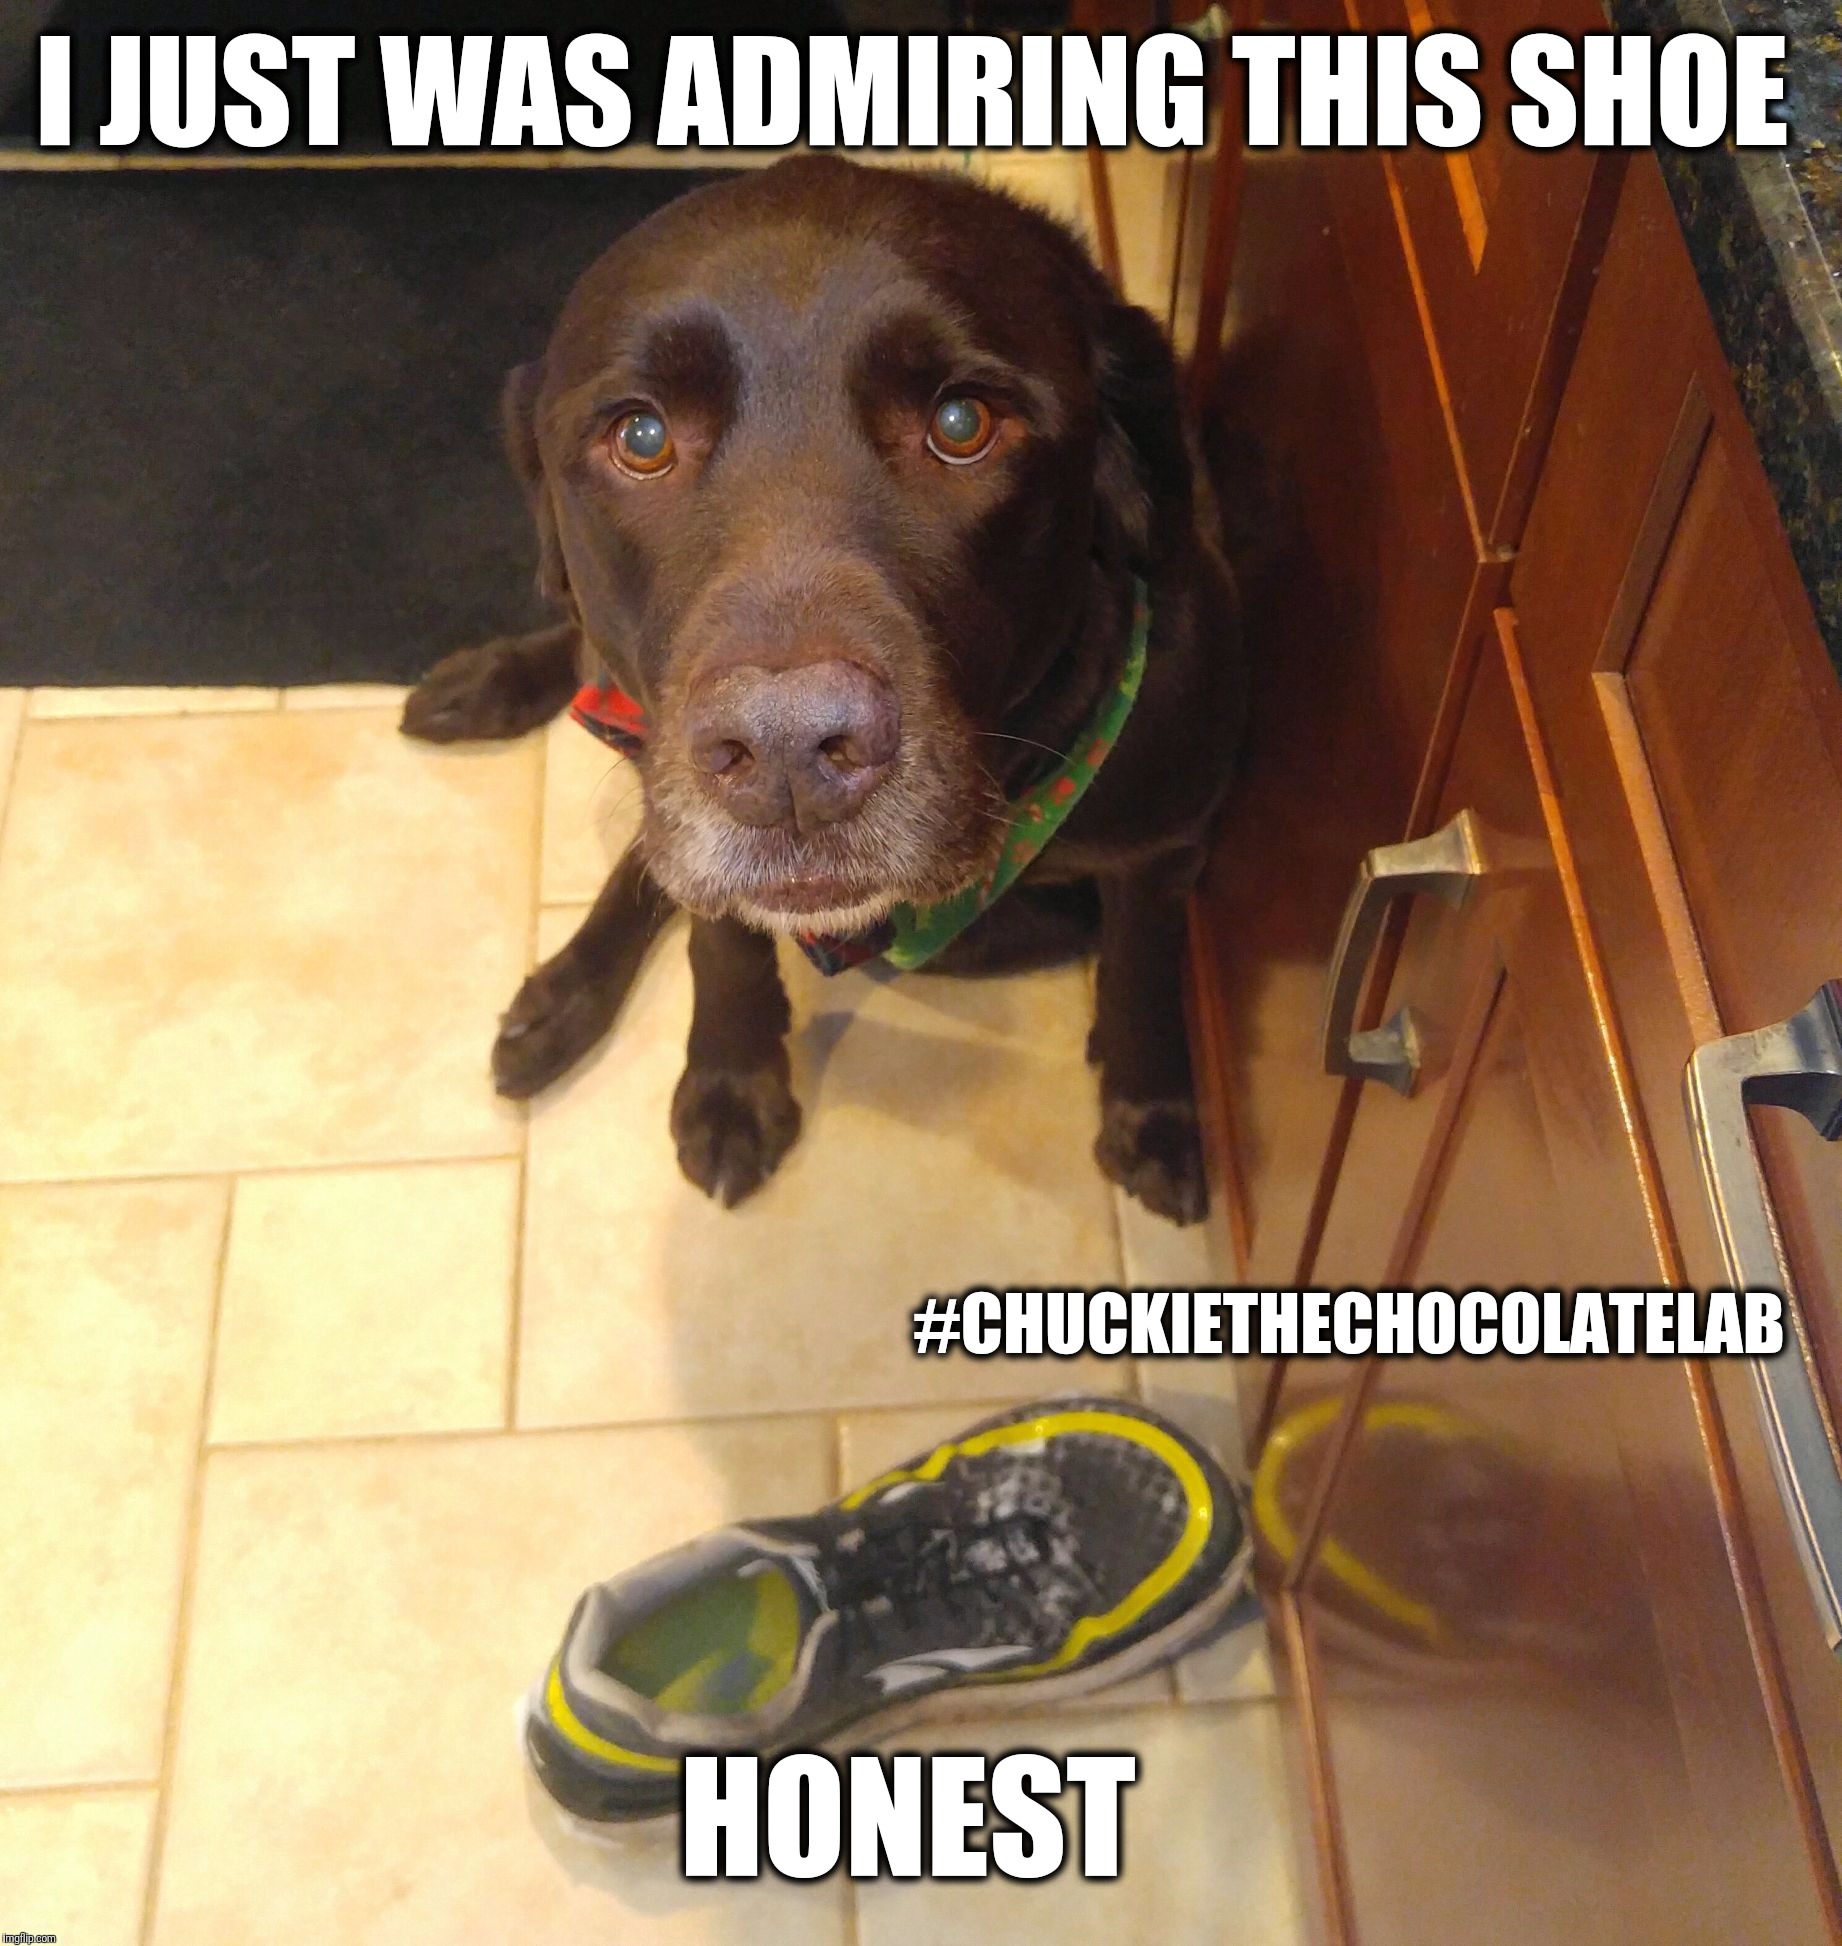 I steal shoes  | I JUST WAS ADMIRING THIS SHOE; #CHUCKIETHECHOCOLATELAB; HONEST | image tagged in chuckie the chocolate lab,dogs,funny,memes,sneakers | made w/ Imgflip meme maker